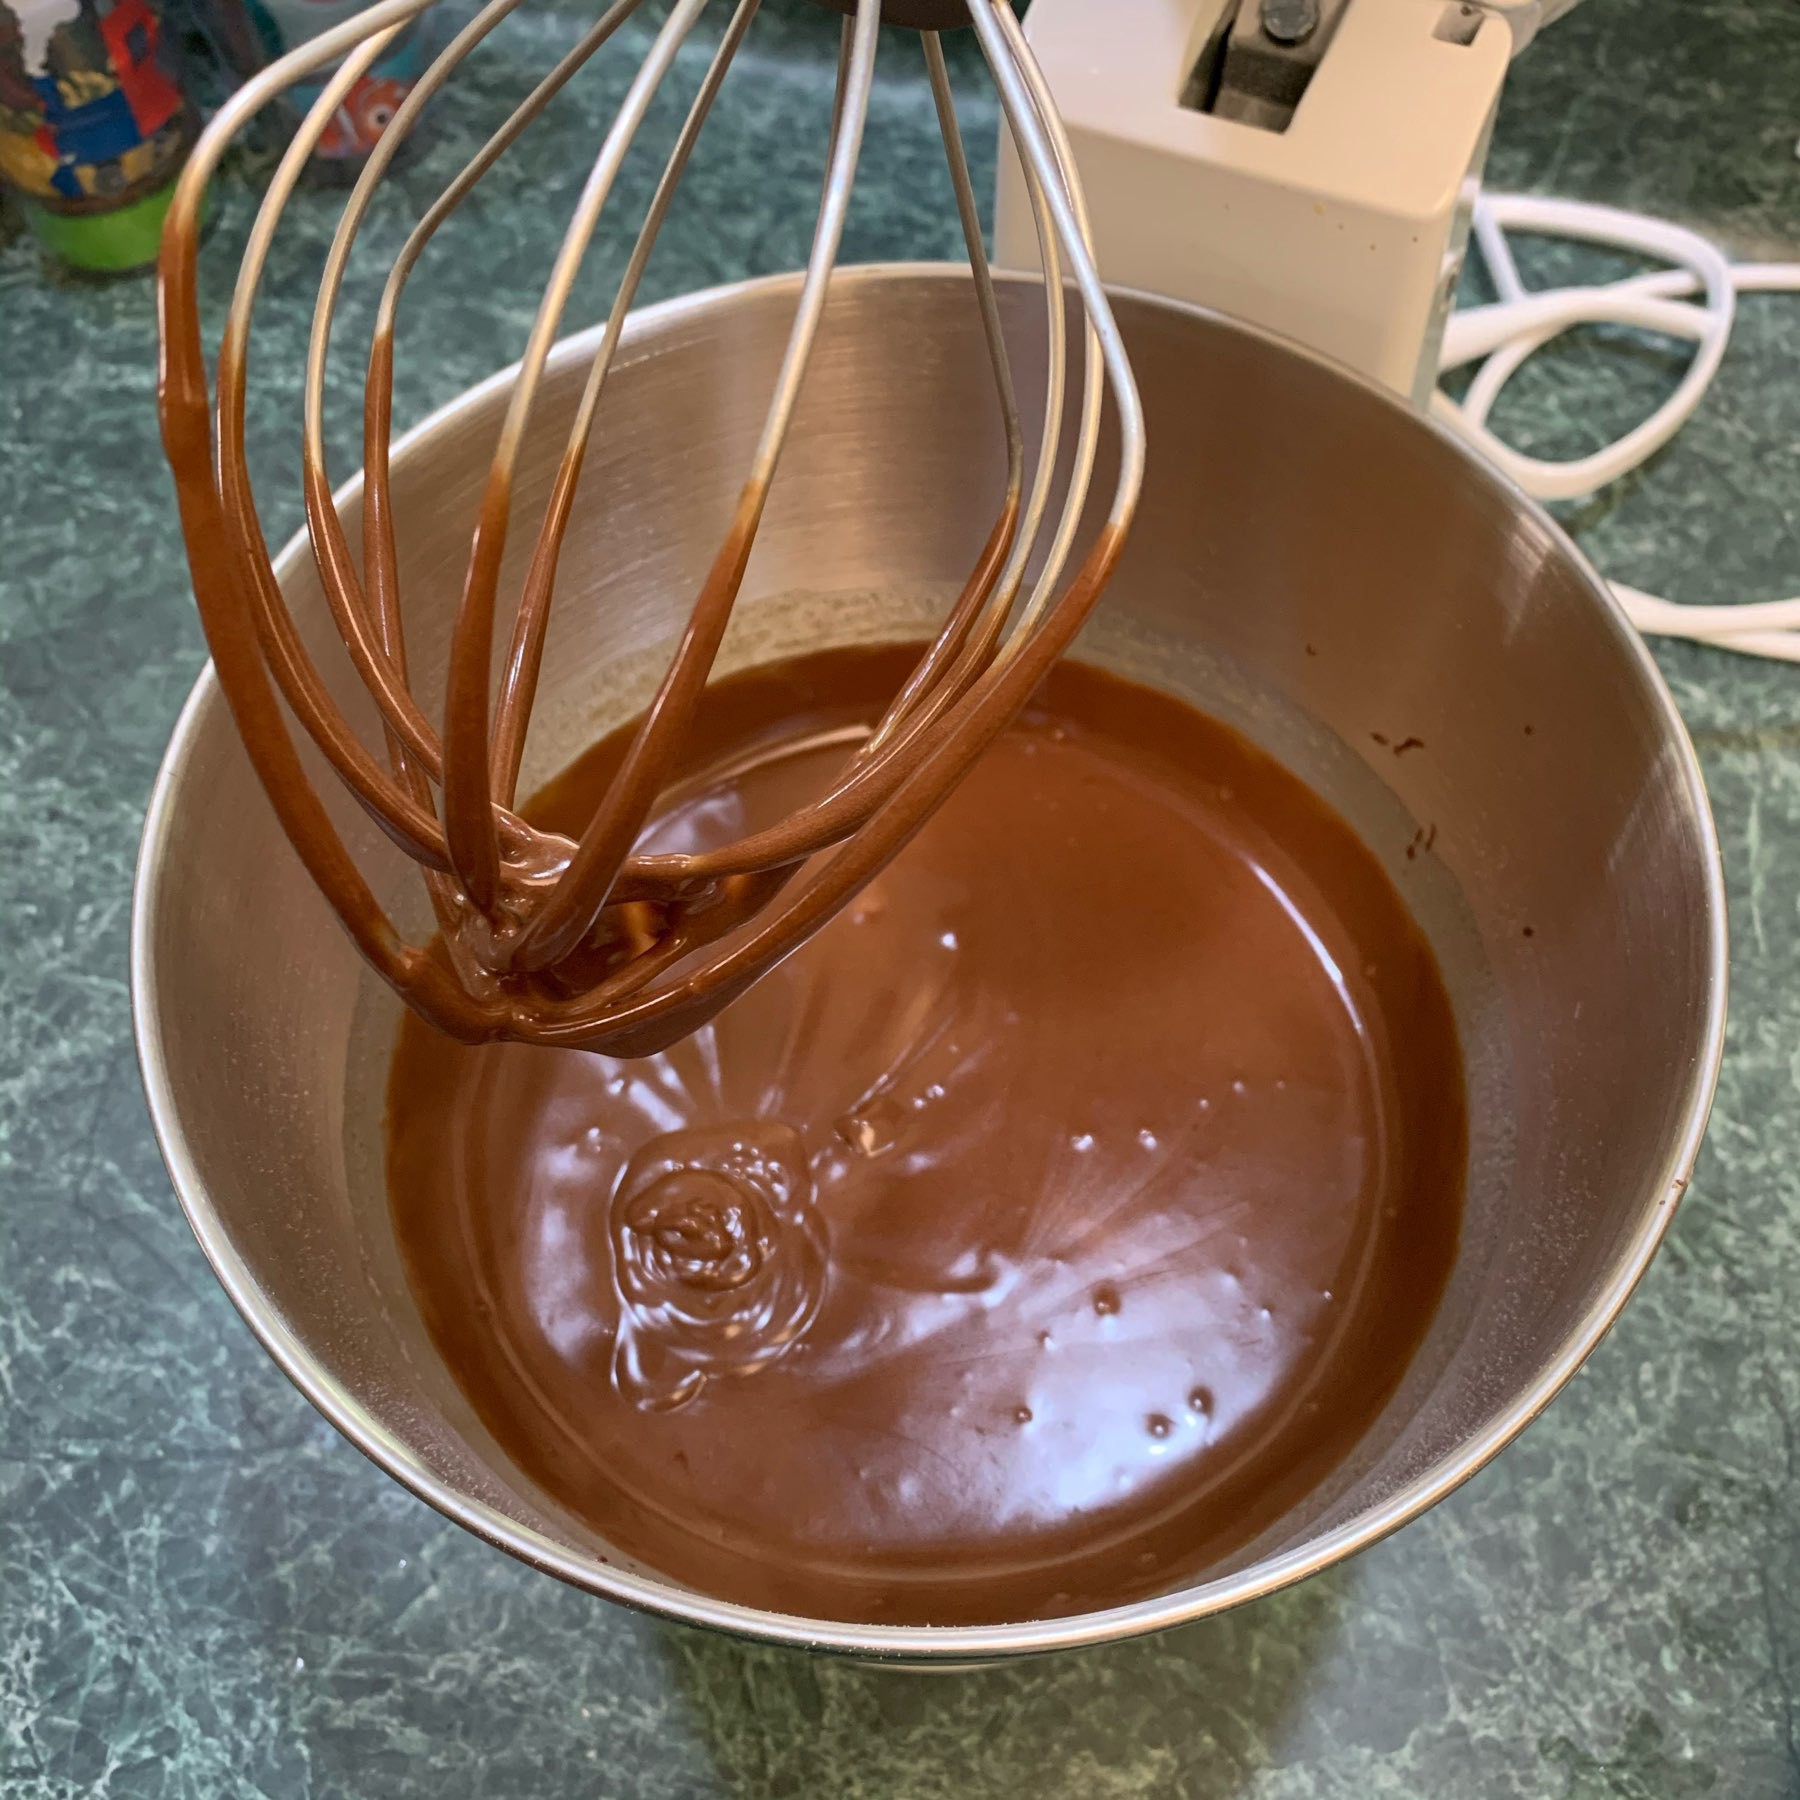 Torte batter in a stand mixer